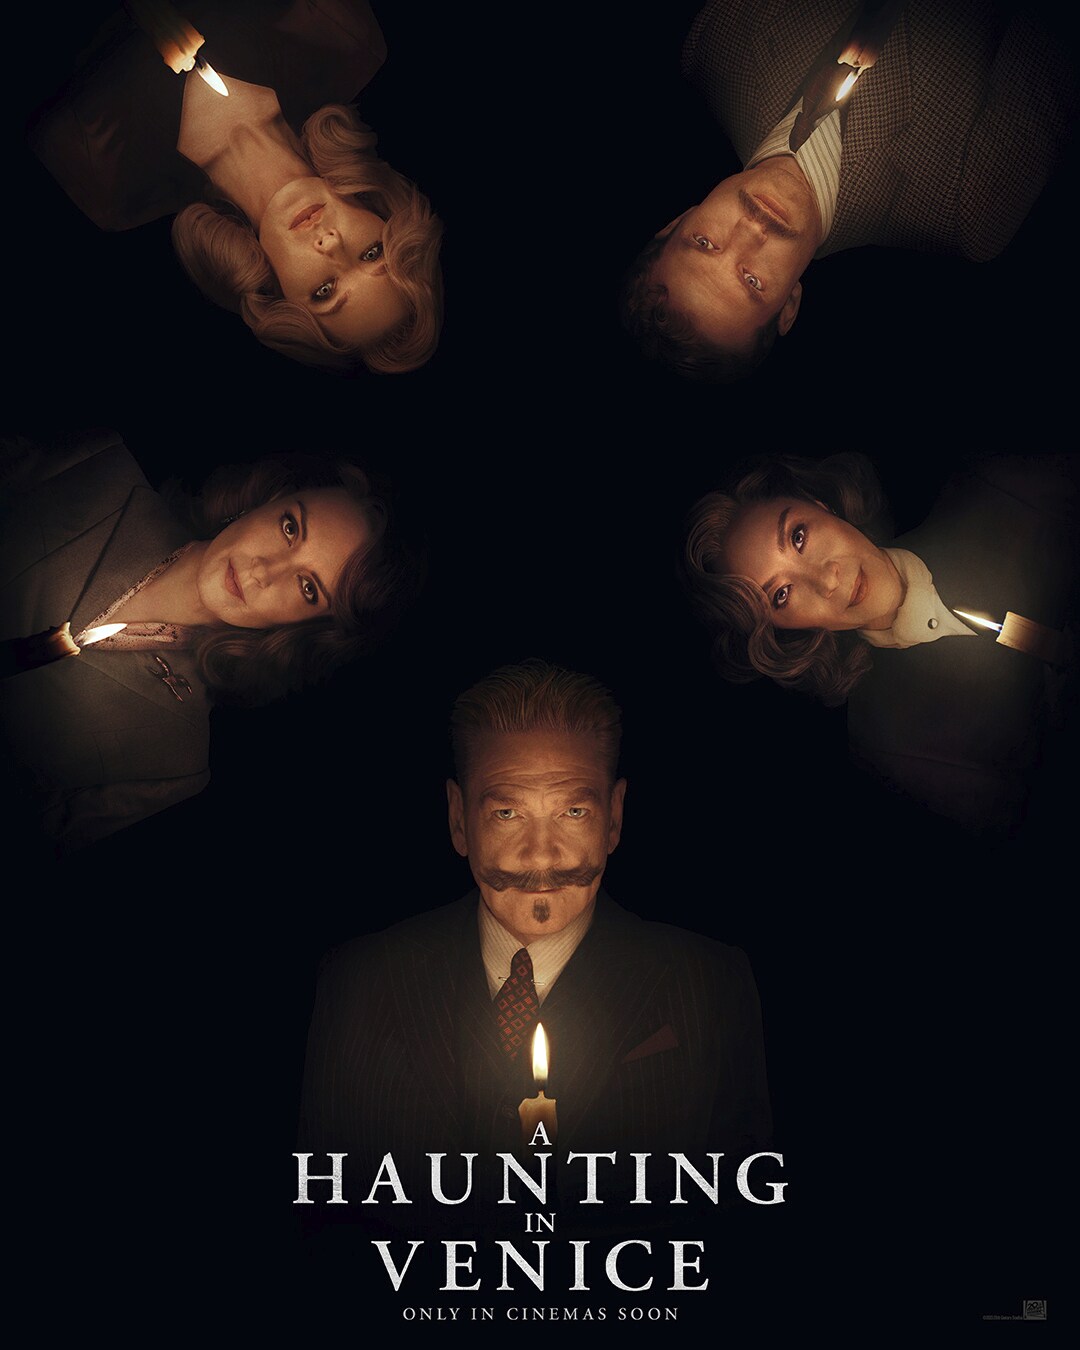 A Haunting in Venice Poster.